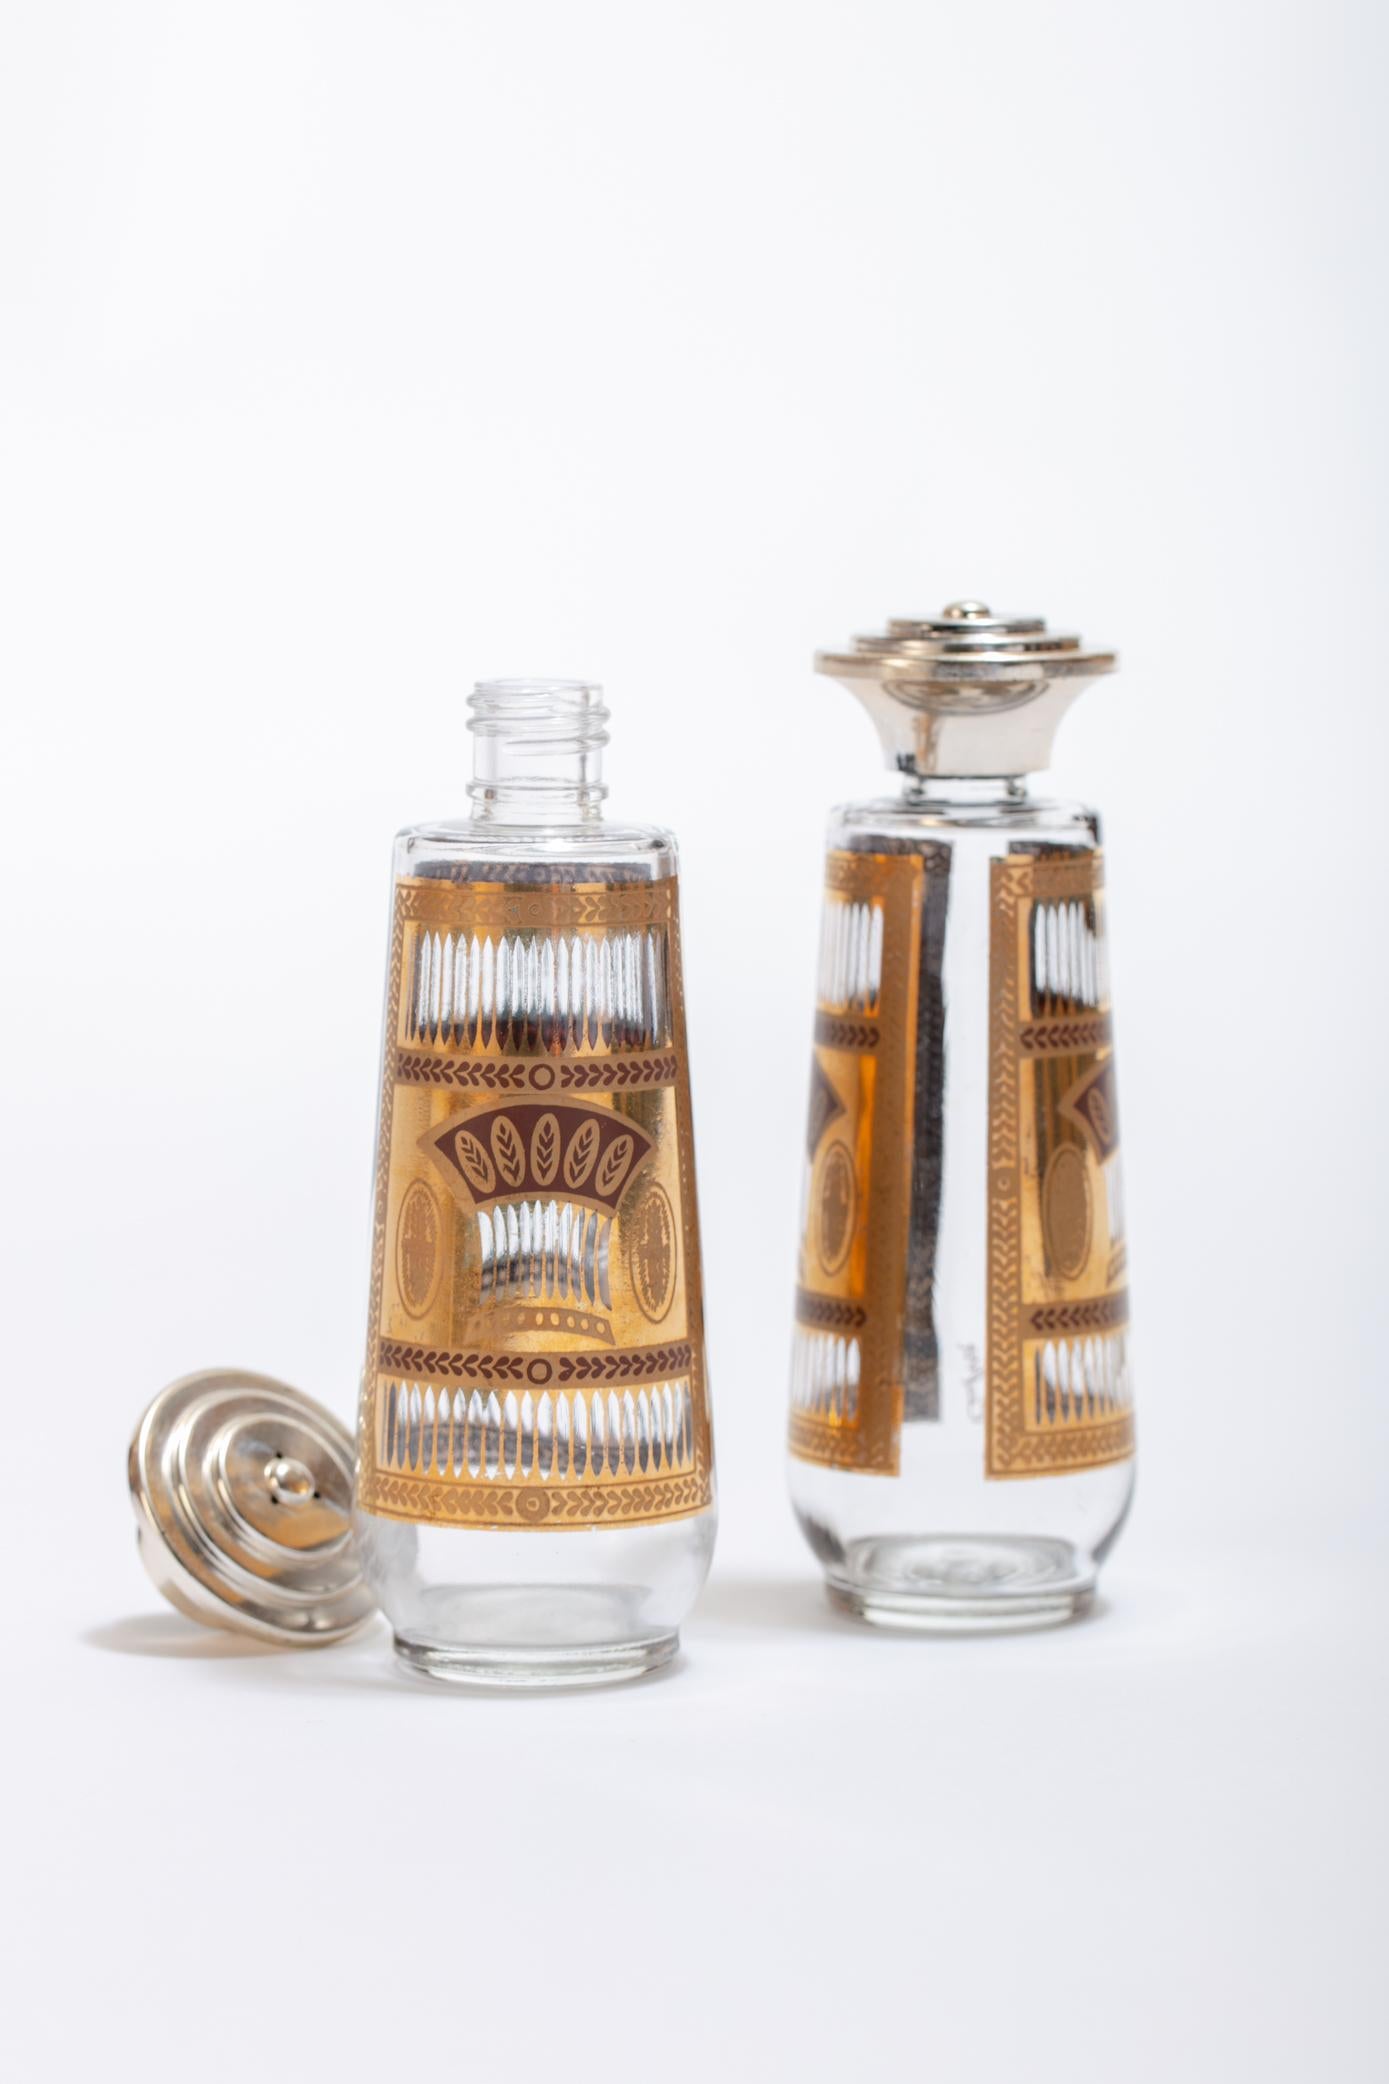 Culver Ltd Mid-Century Modern, atomic style glass salt and pepper shakers featuring 22-karat gold Golden Wheat pattern on the glass. The lids are made of chrome-toned painted plastic and are in good vintage condition. Want to see more beautiful